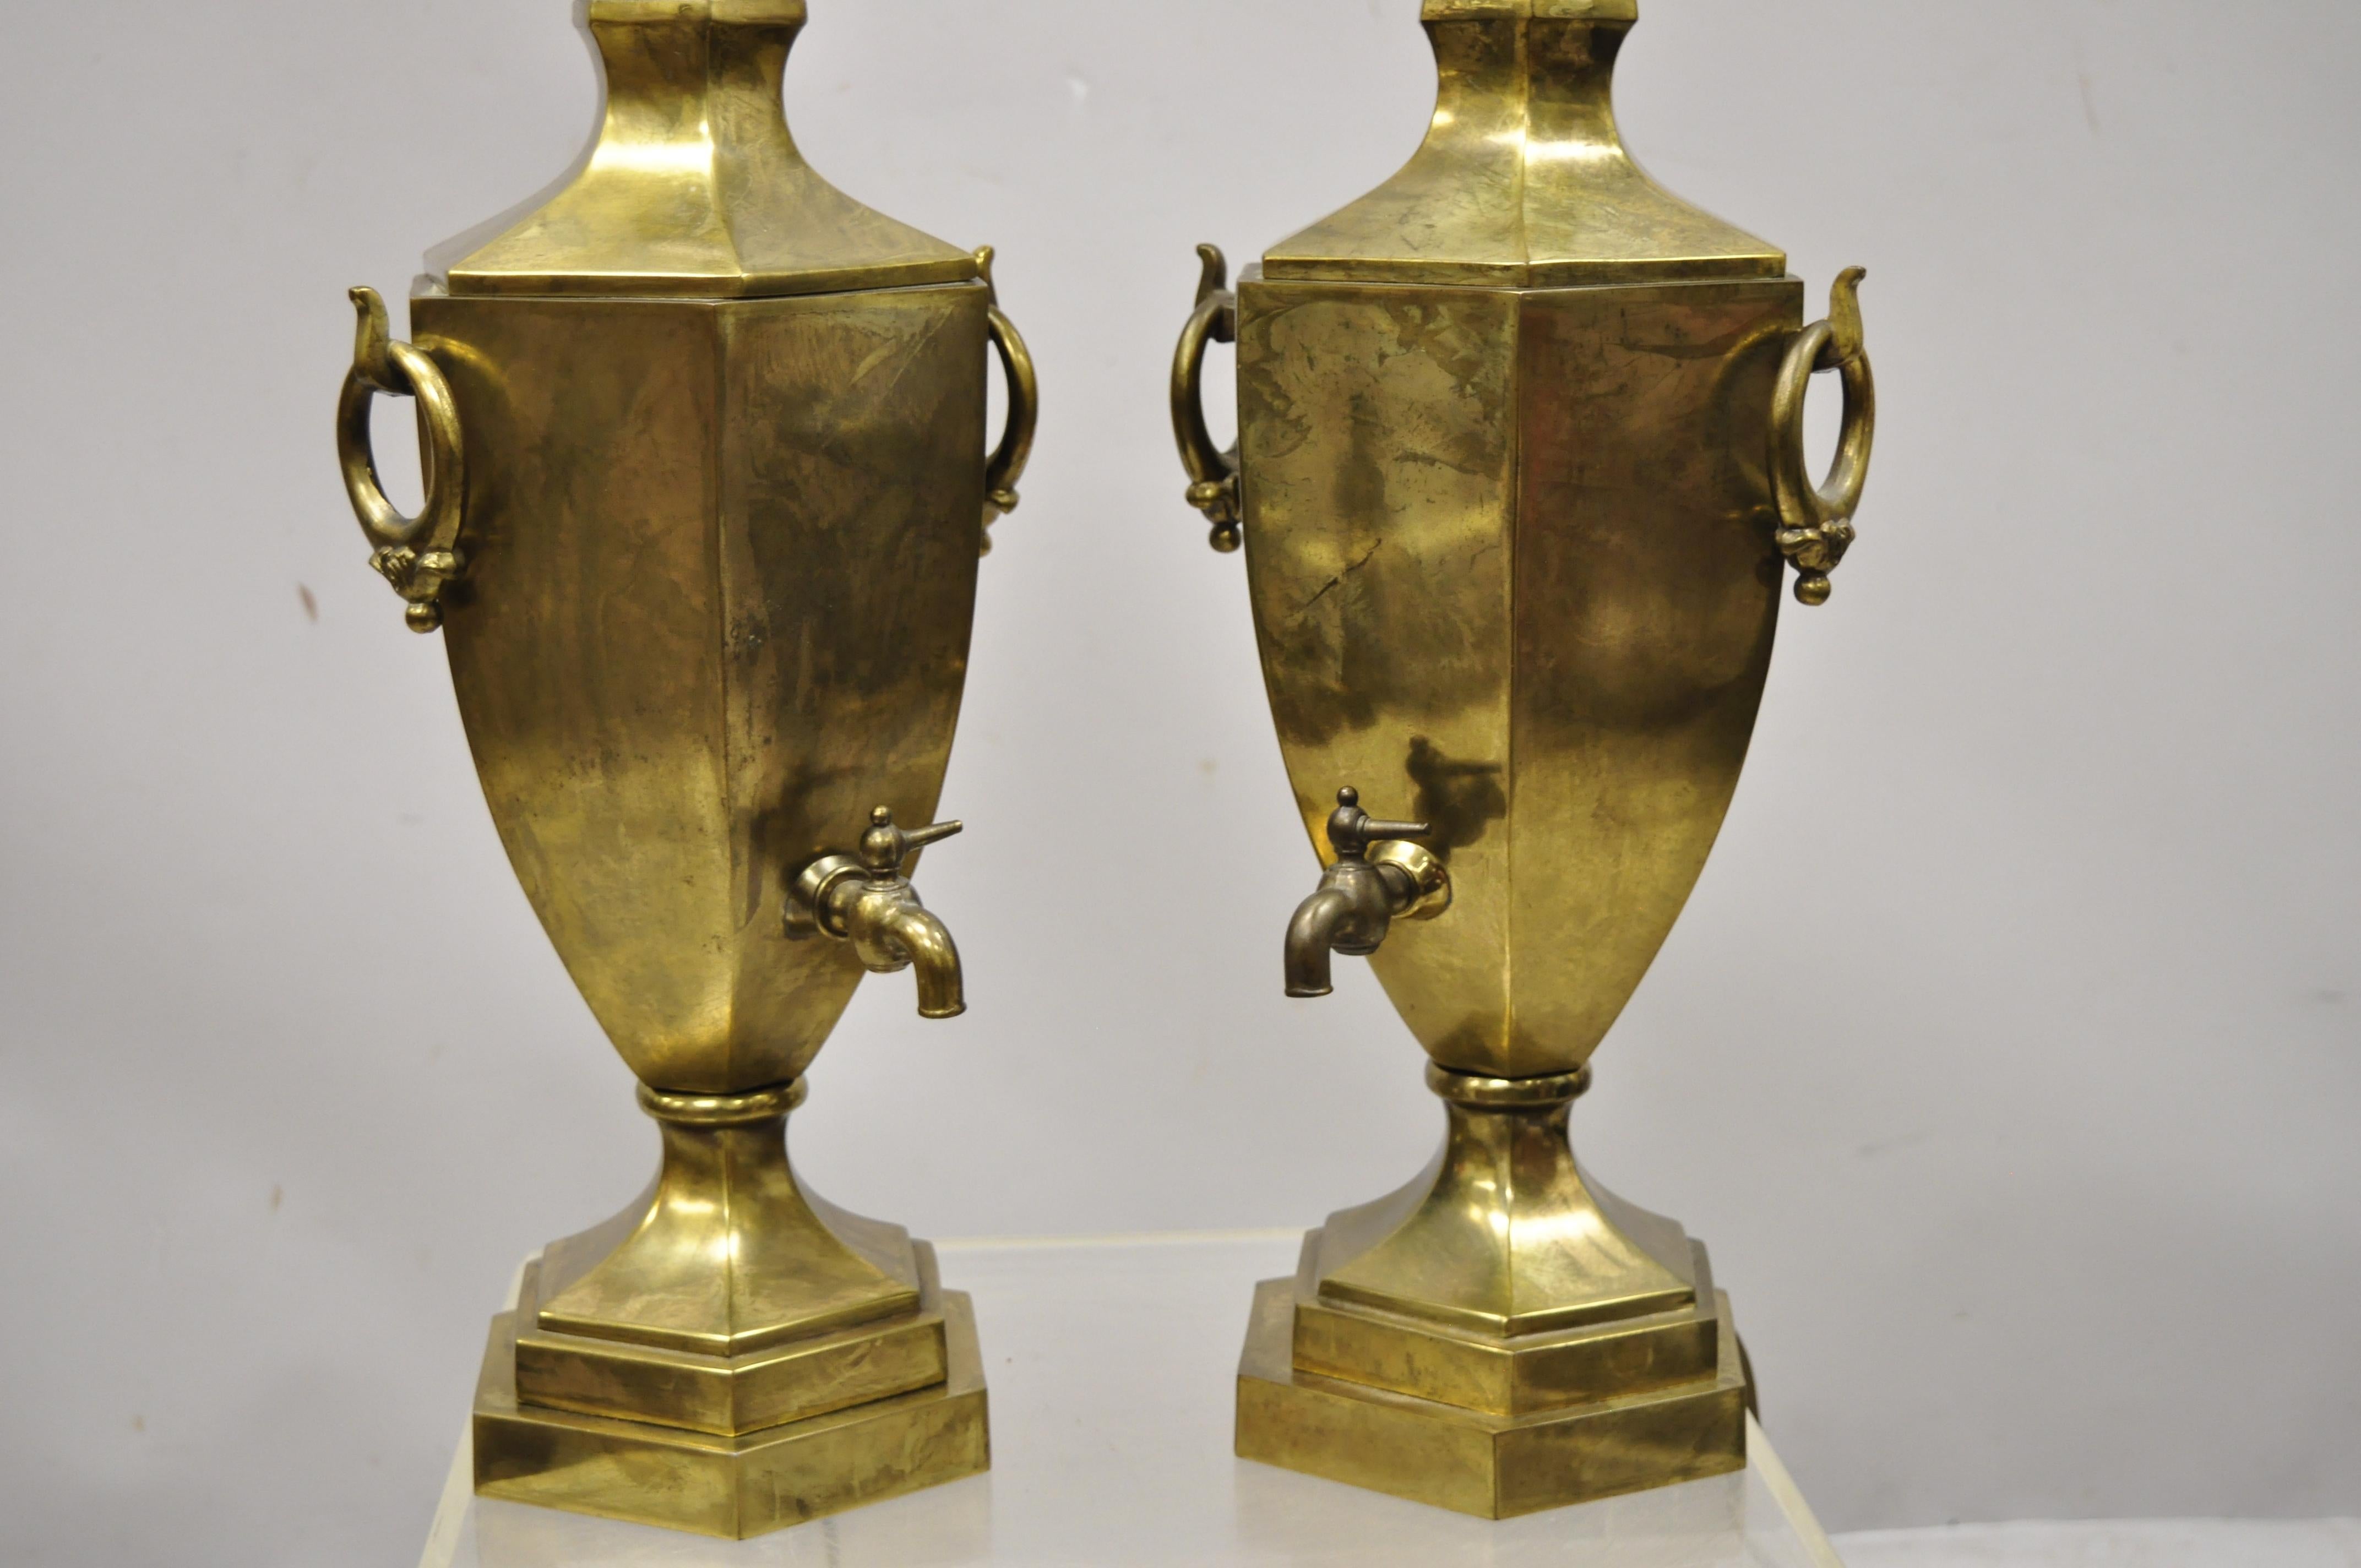 Paul Hanson Burnished Brass Samovar Urn Form Table Lamps with Shades - a Pair For Sale 6